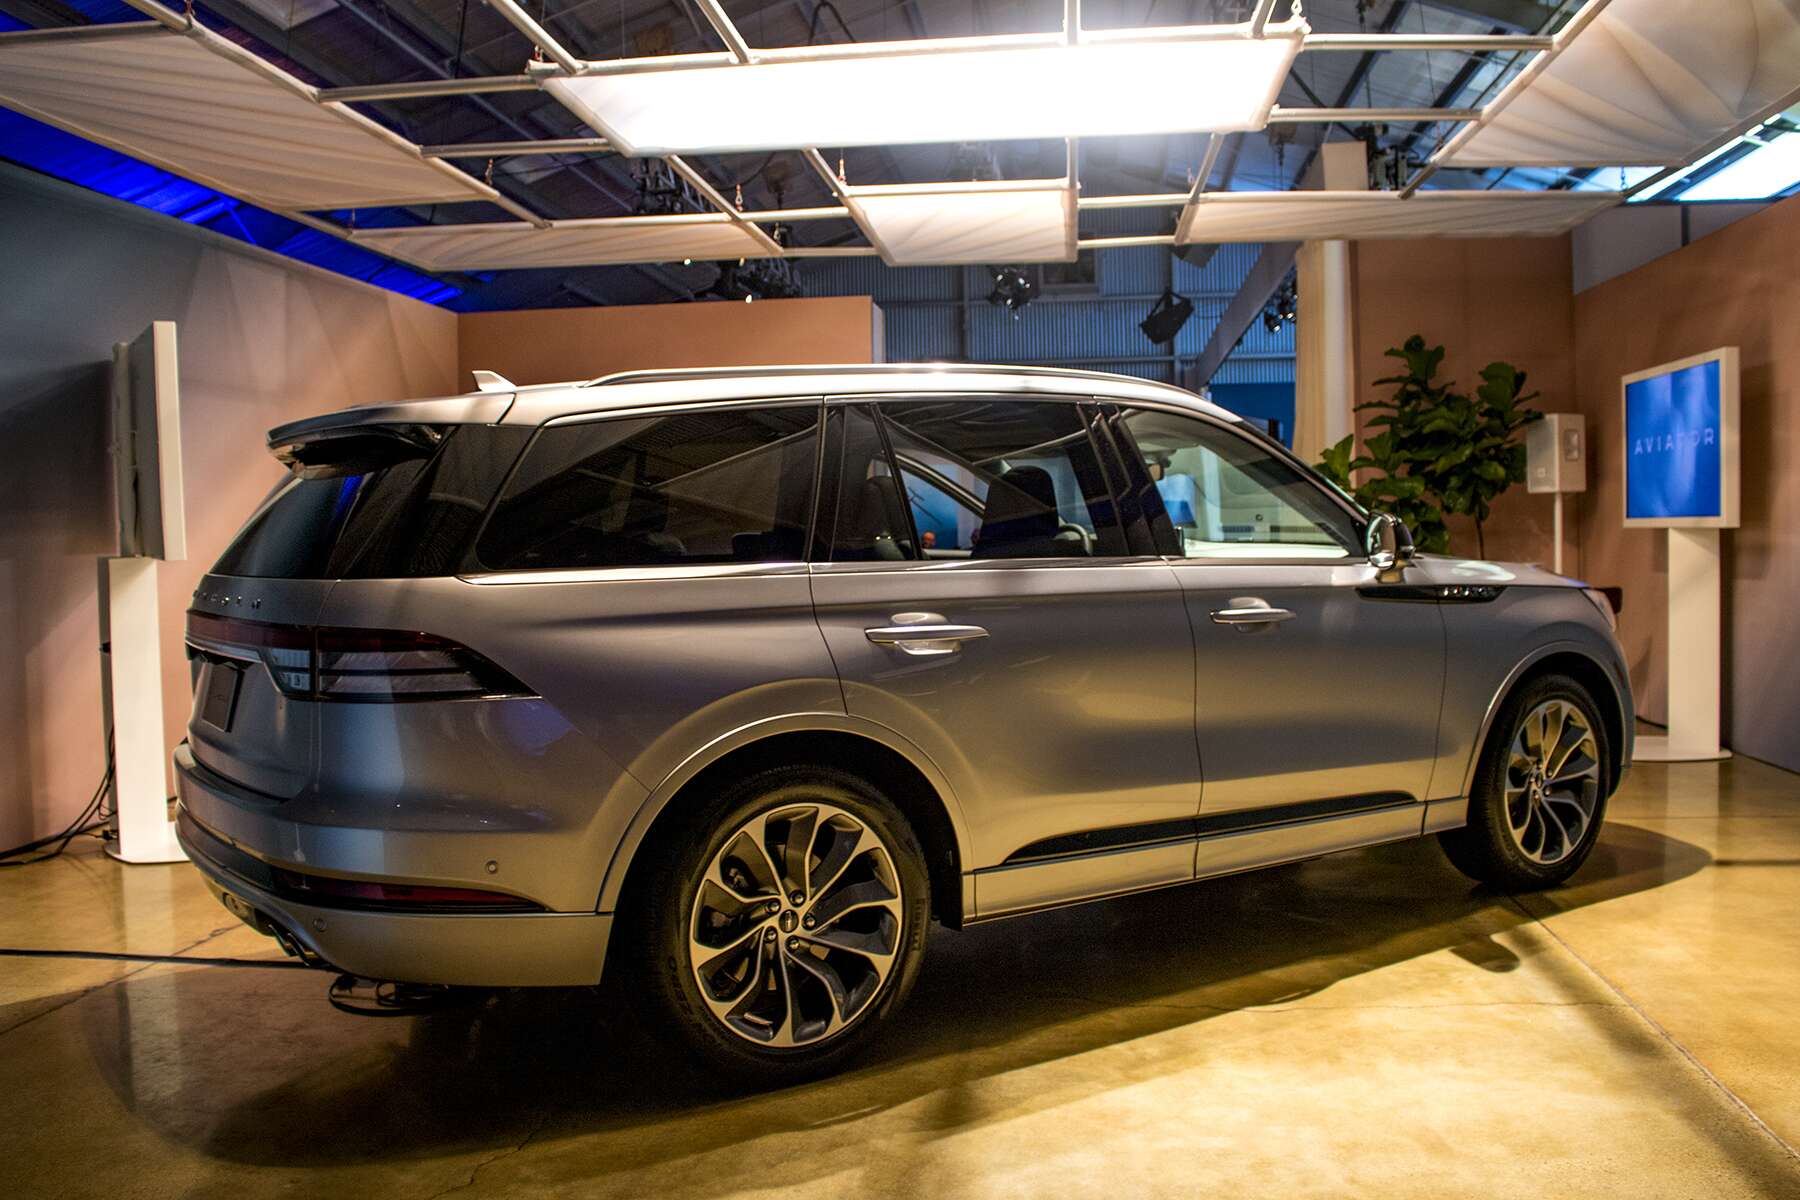 The 450-HP 2020 Lincoln Aviator SUV Is a Classic Vision of Modern